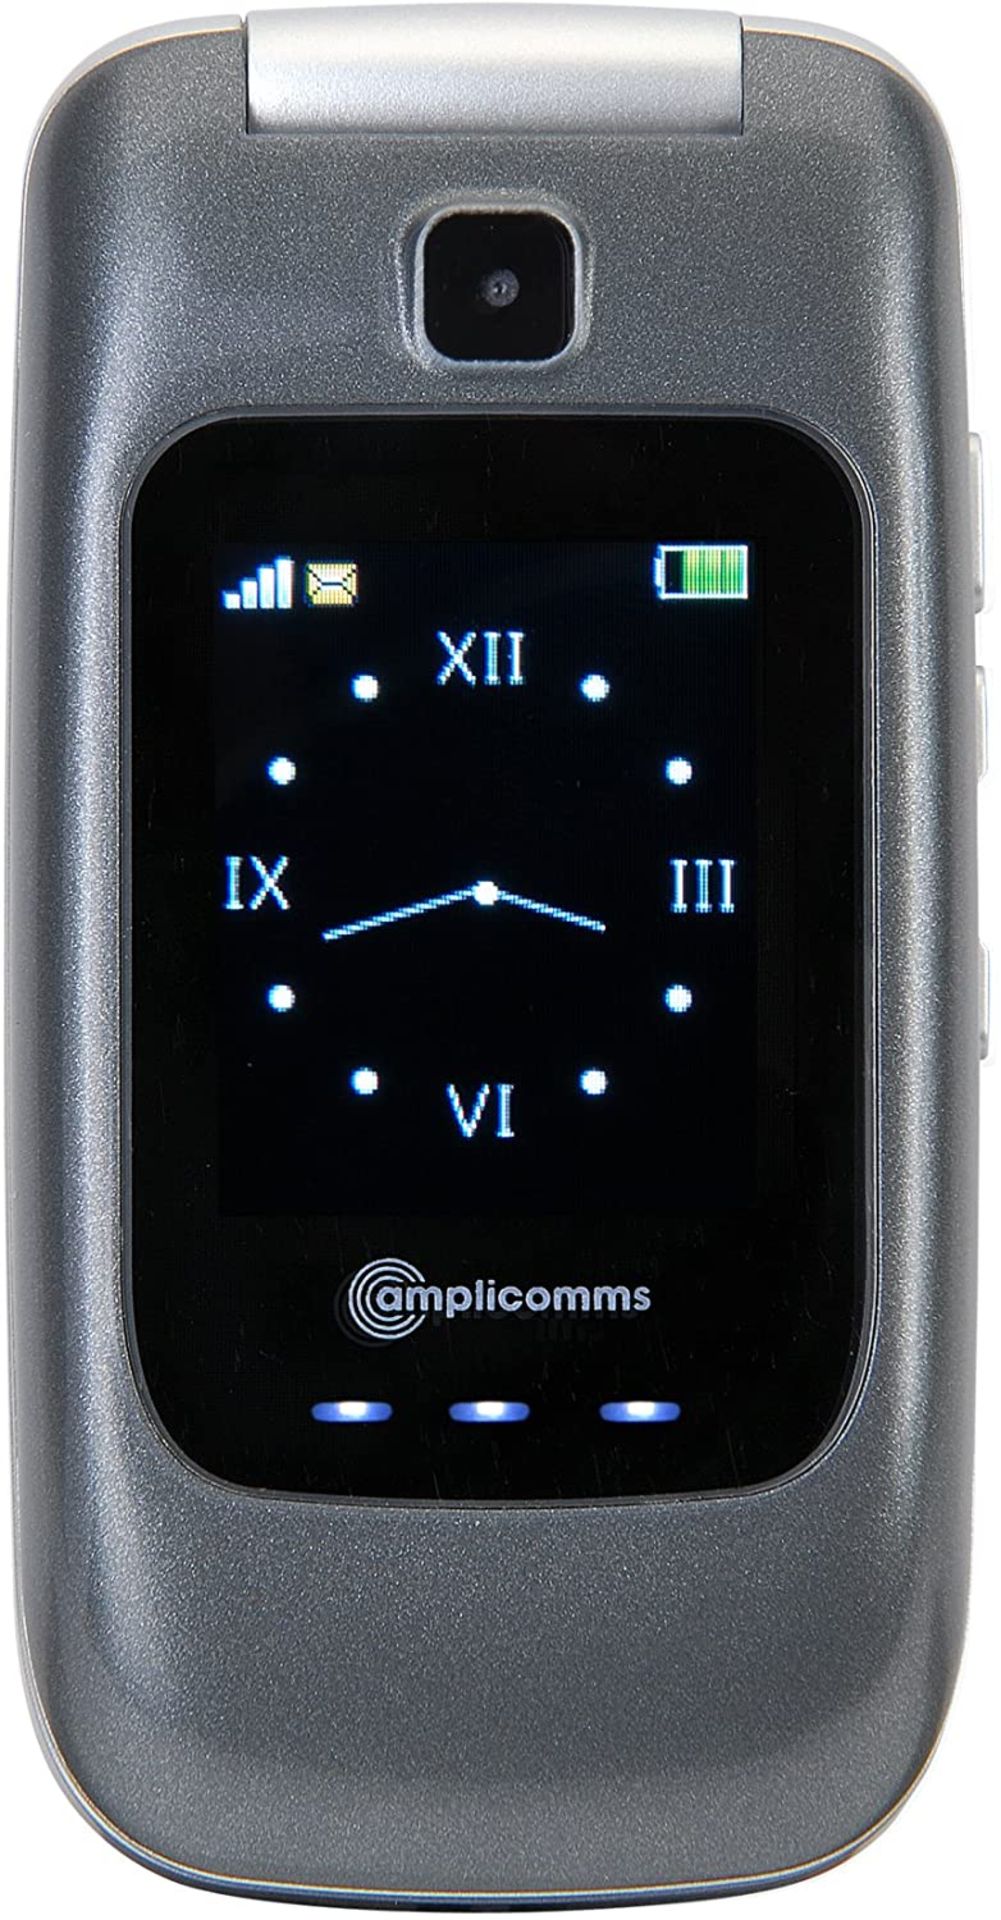 (M40) Amplicomms PowerTel M7500 Silver Amplified Mobile Phone Easy to use with large illuminate... - Image 2 of 3